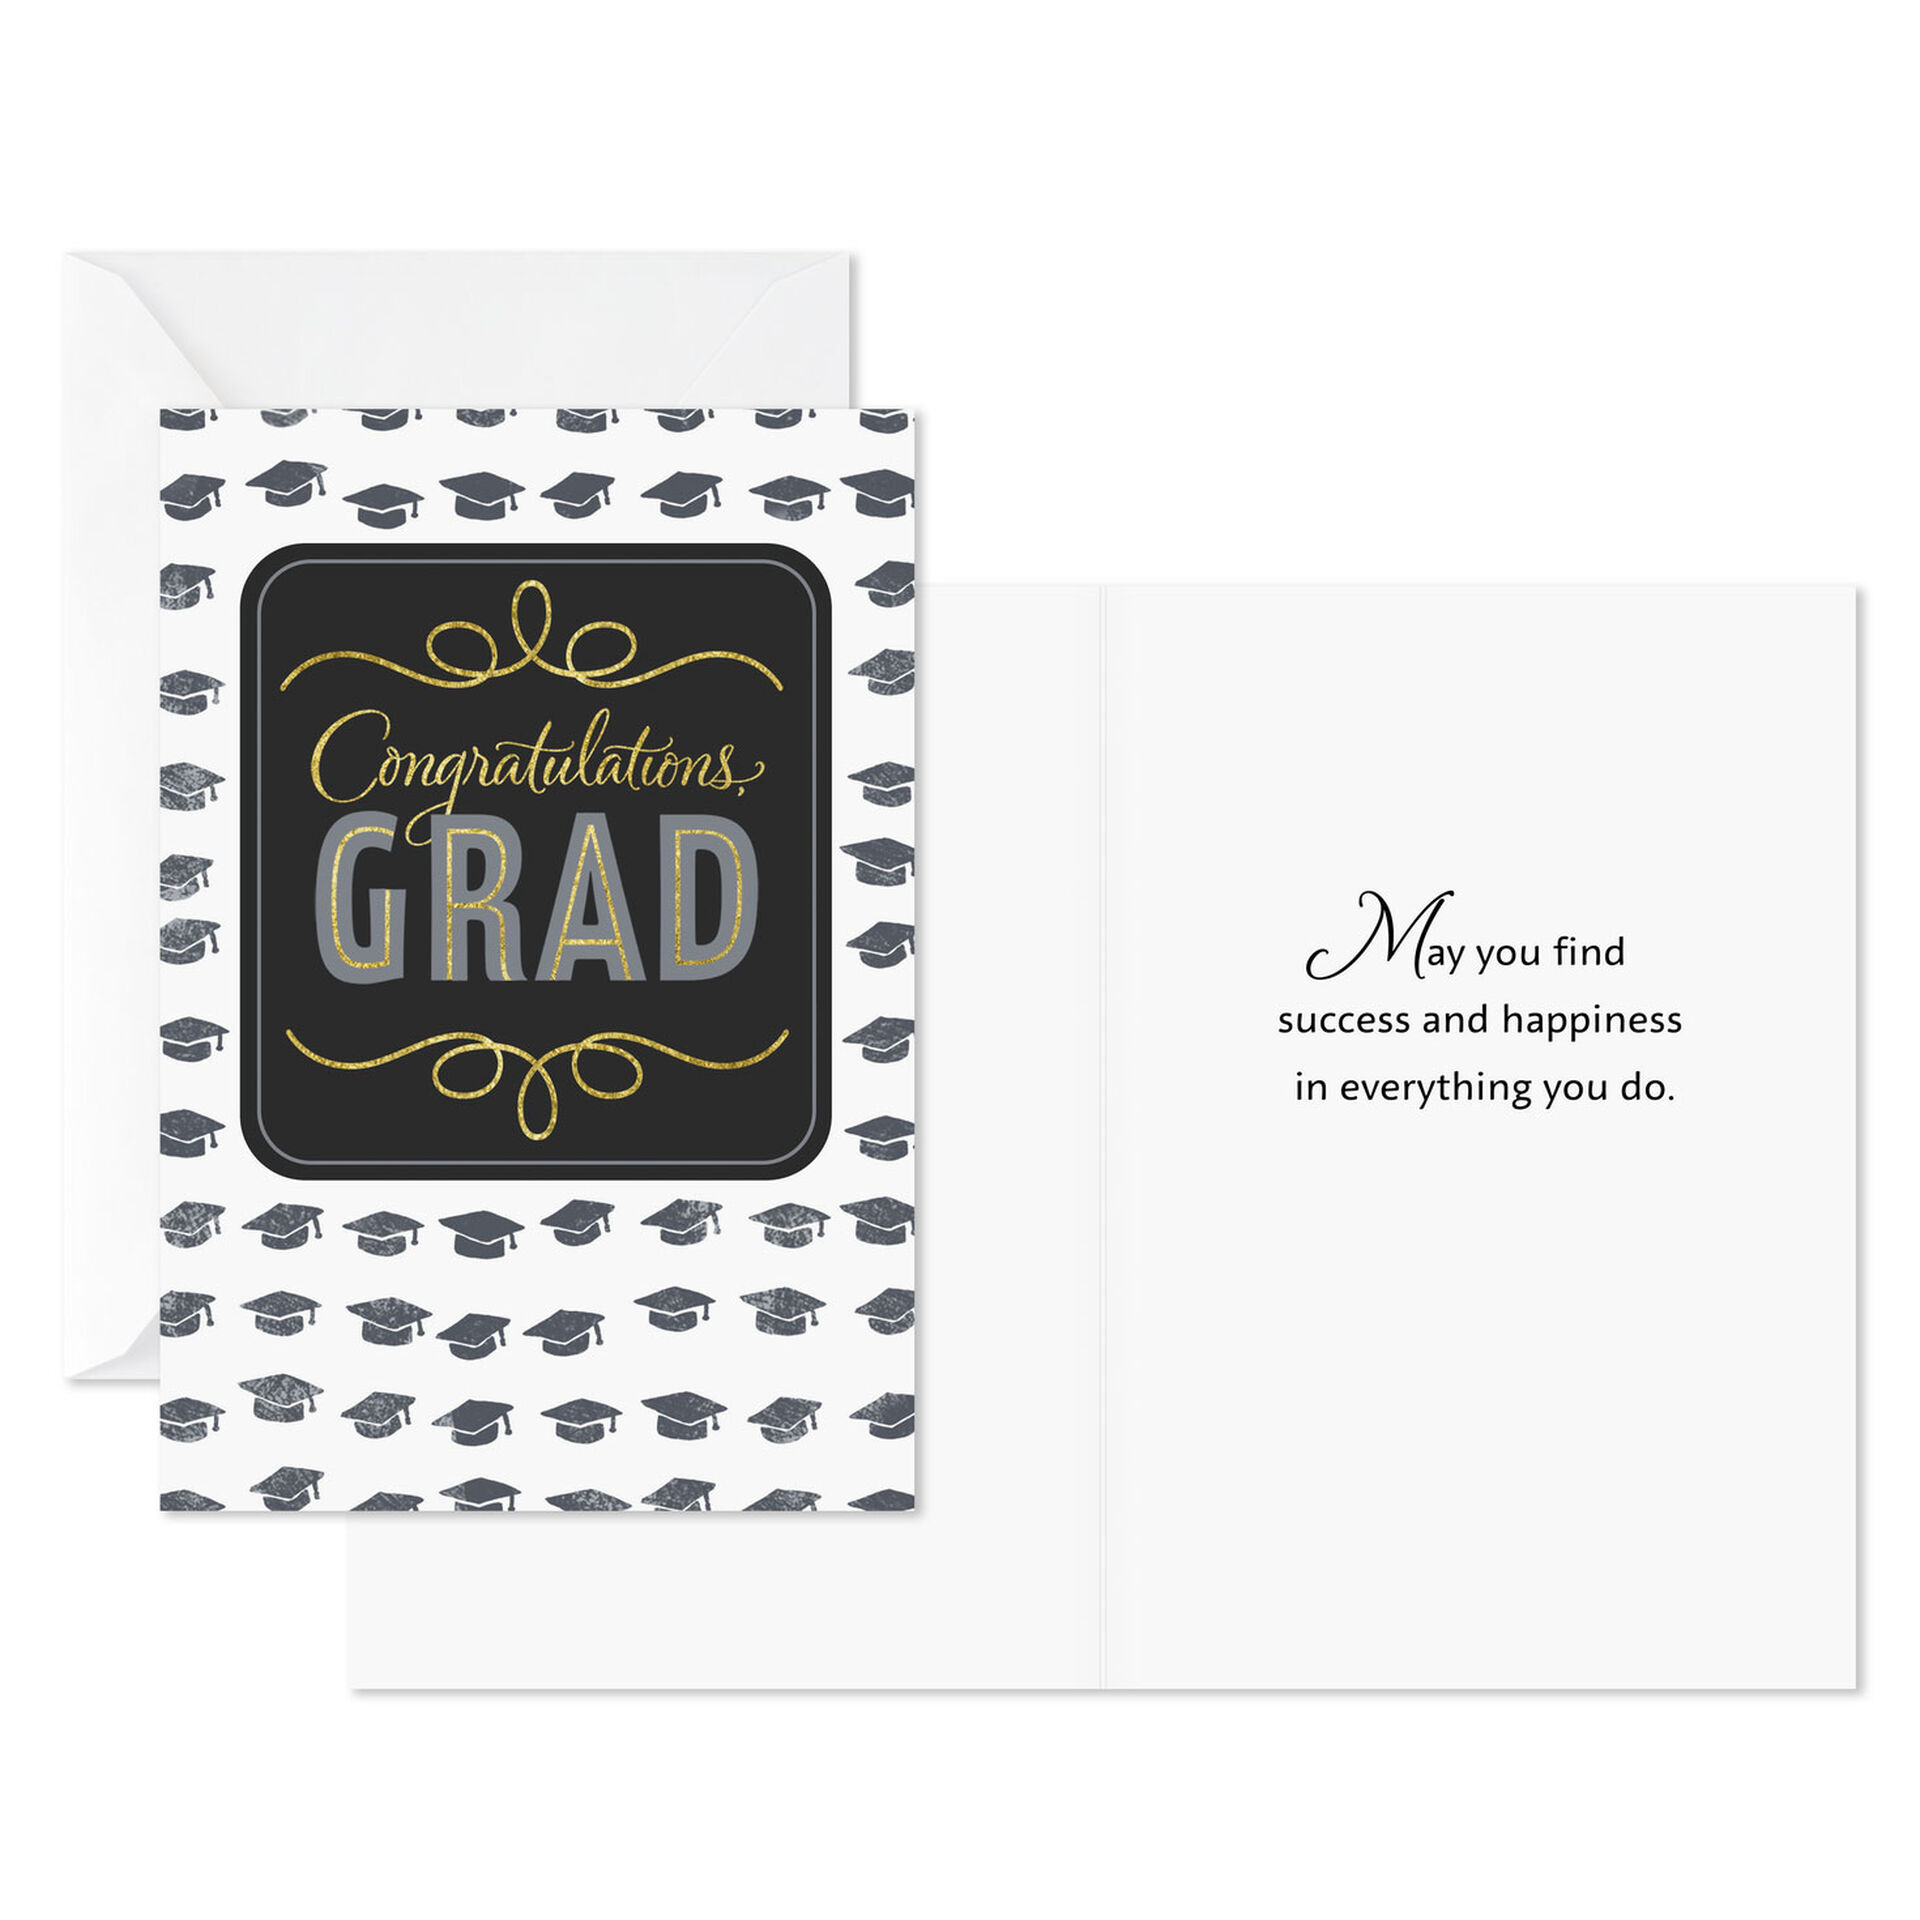 Wishes-for-Success-Graduation-Cards-Assortment-Pack_699GRP8145_02